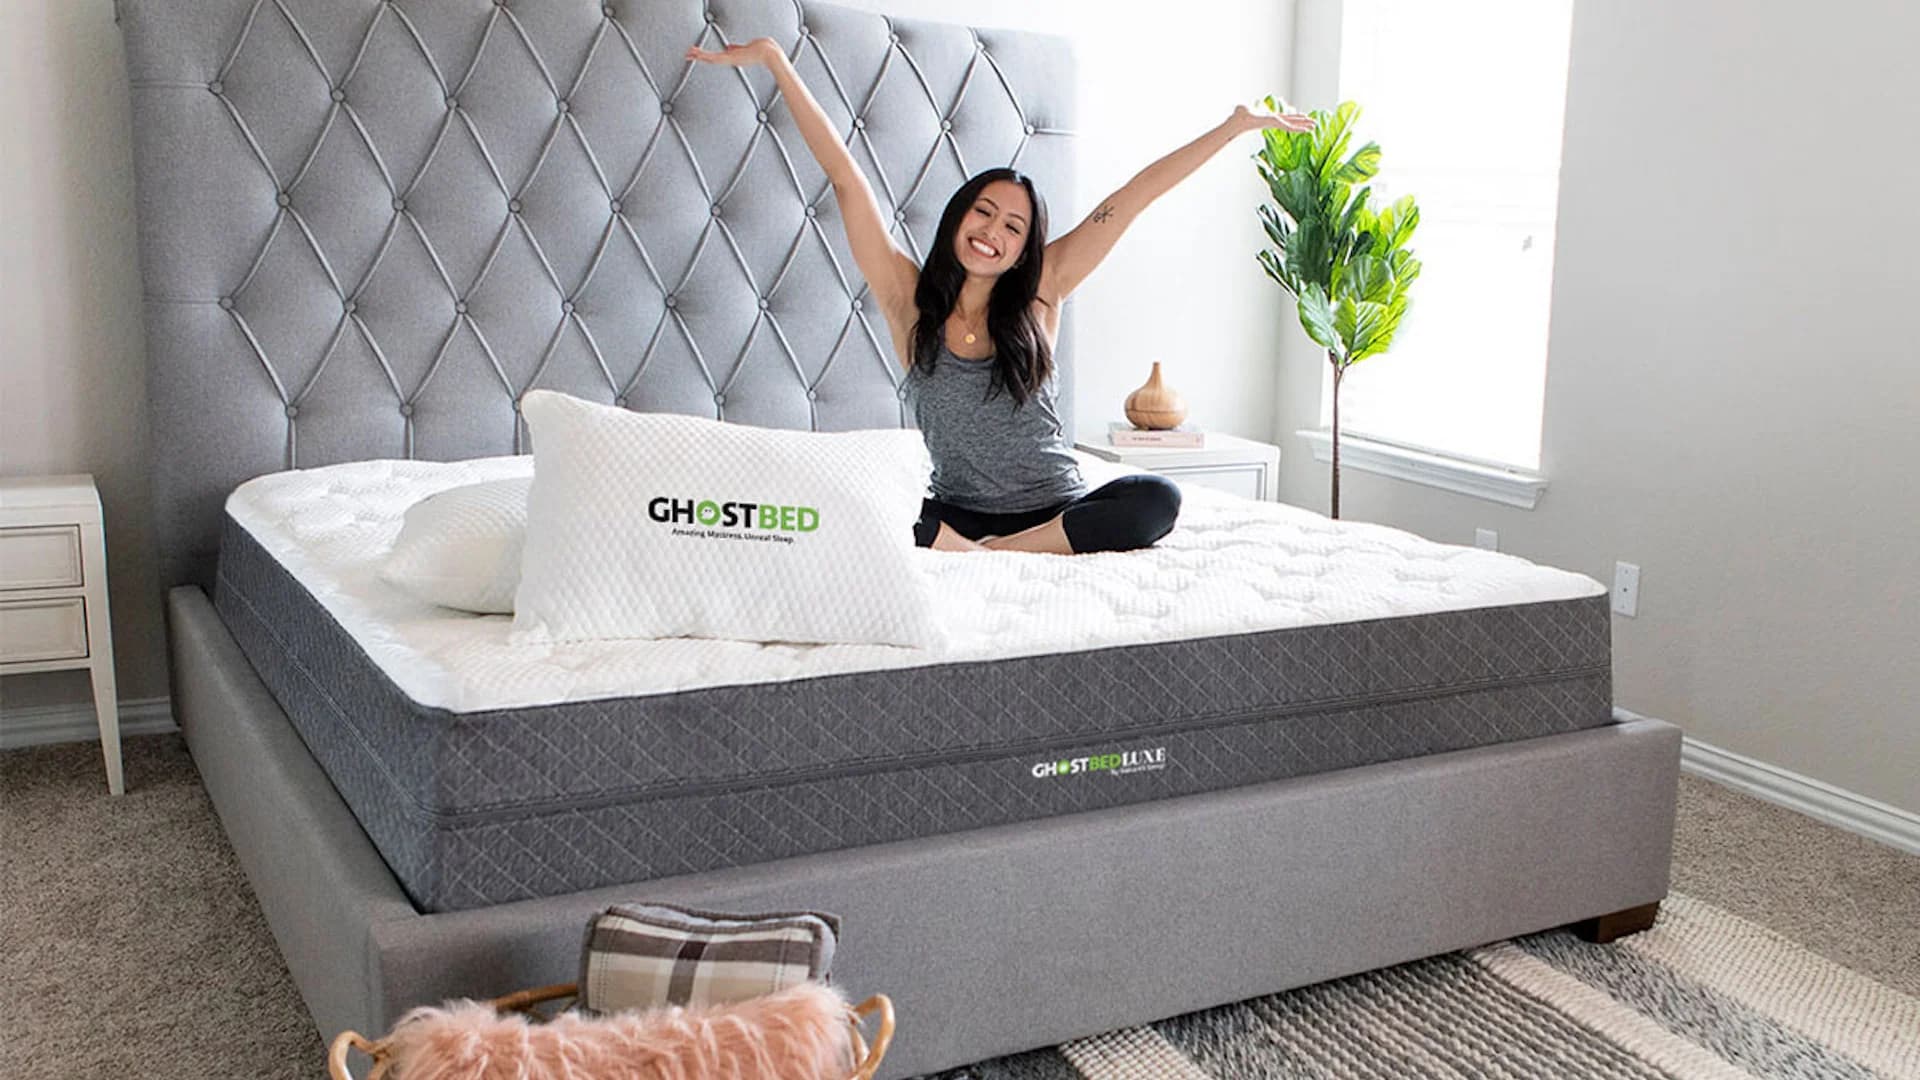 Get cozier, deeper sleep with 29% off this remarkable mattress